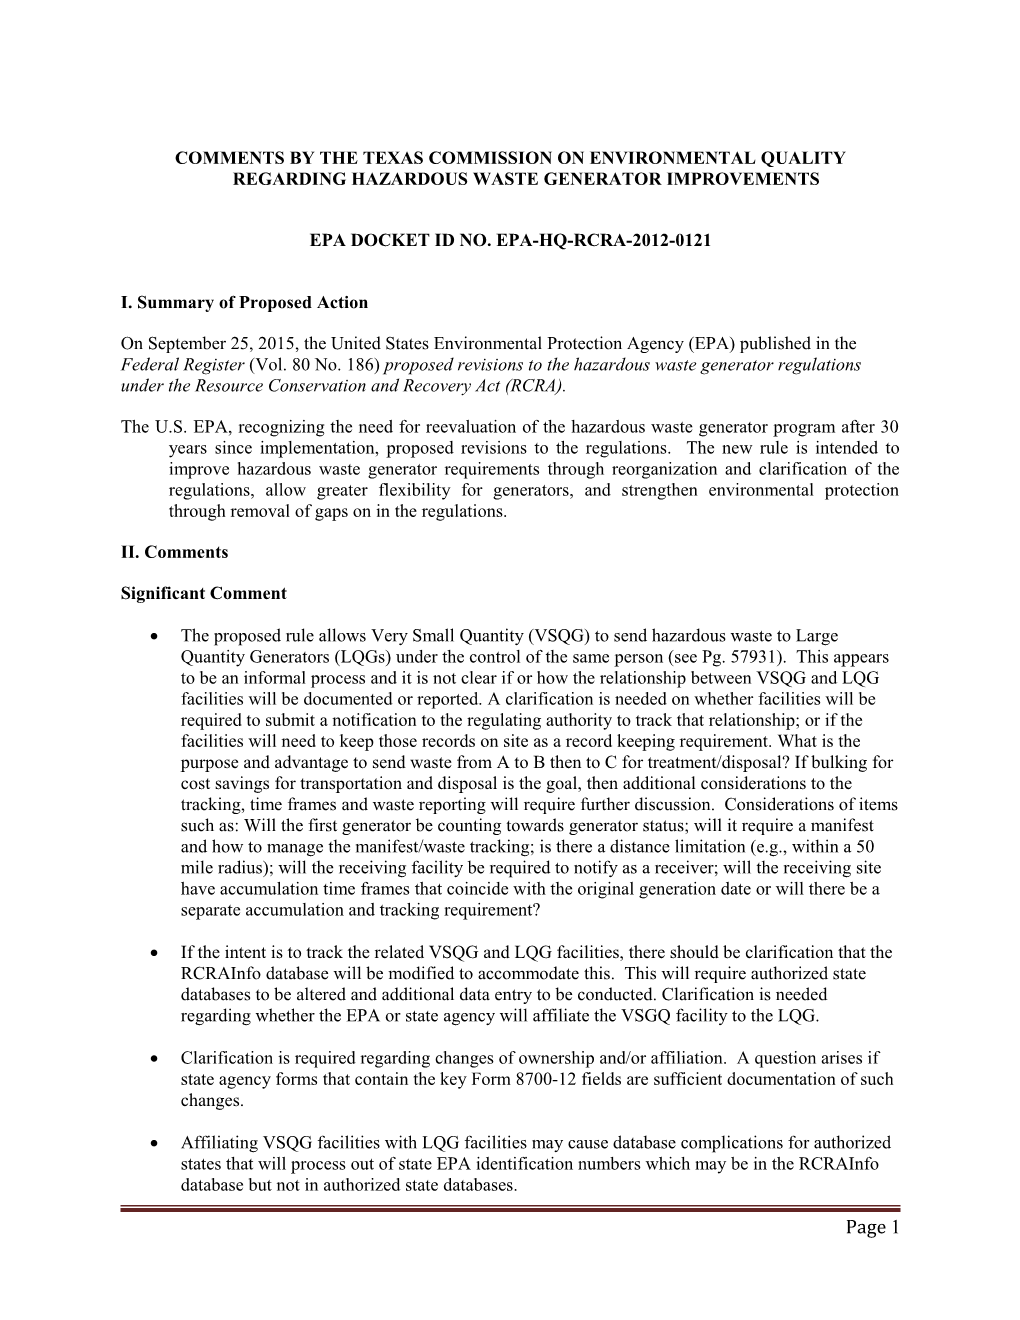 Comments by the Texas Commission on Environmental Quality Regarding HAZARDOUS WASTE GENERATOR